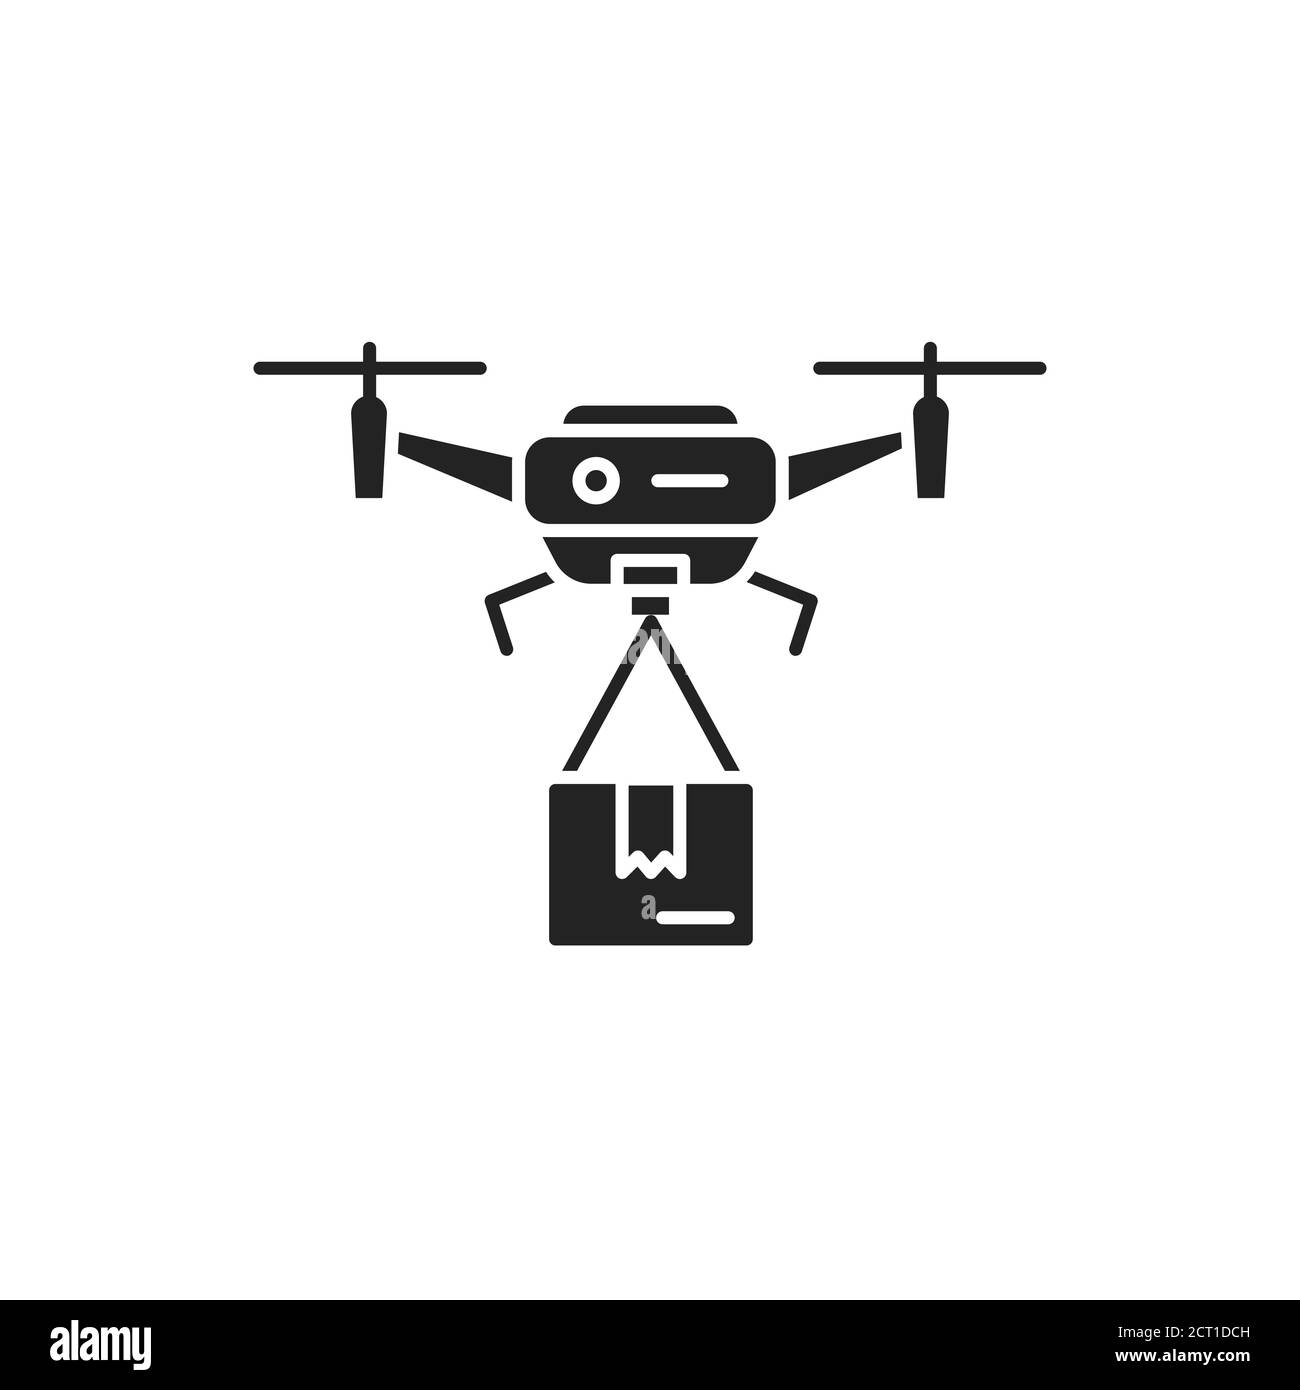 Drone delivery black glyph icon. Quadcopter carrying a package. Aircraft device concept. Sign for web page, mobile app, banner, social media Stock Vector